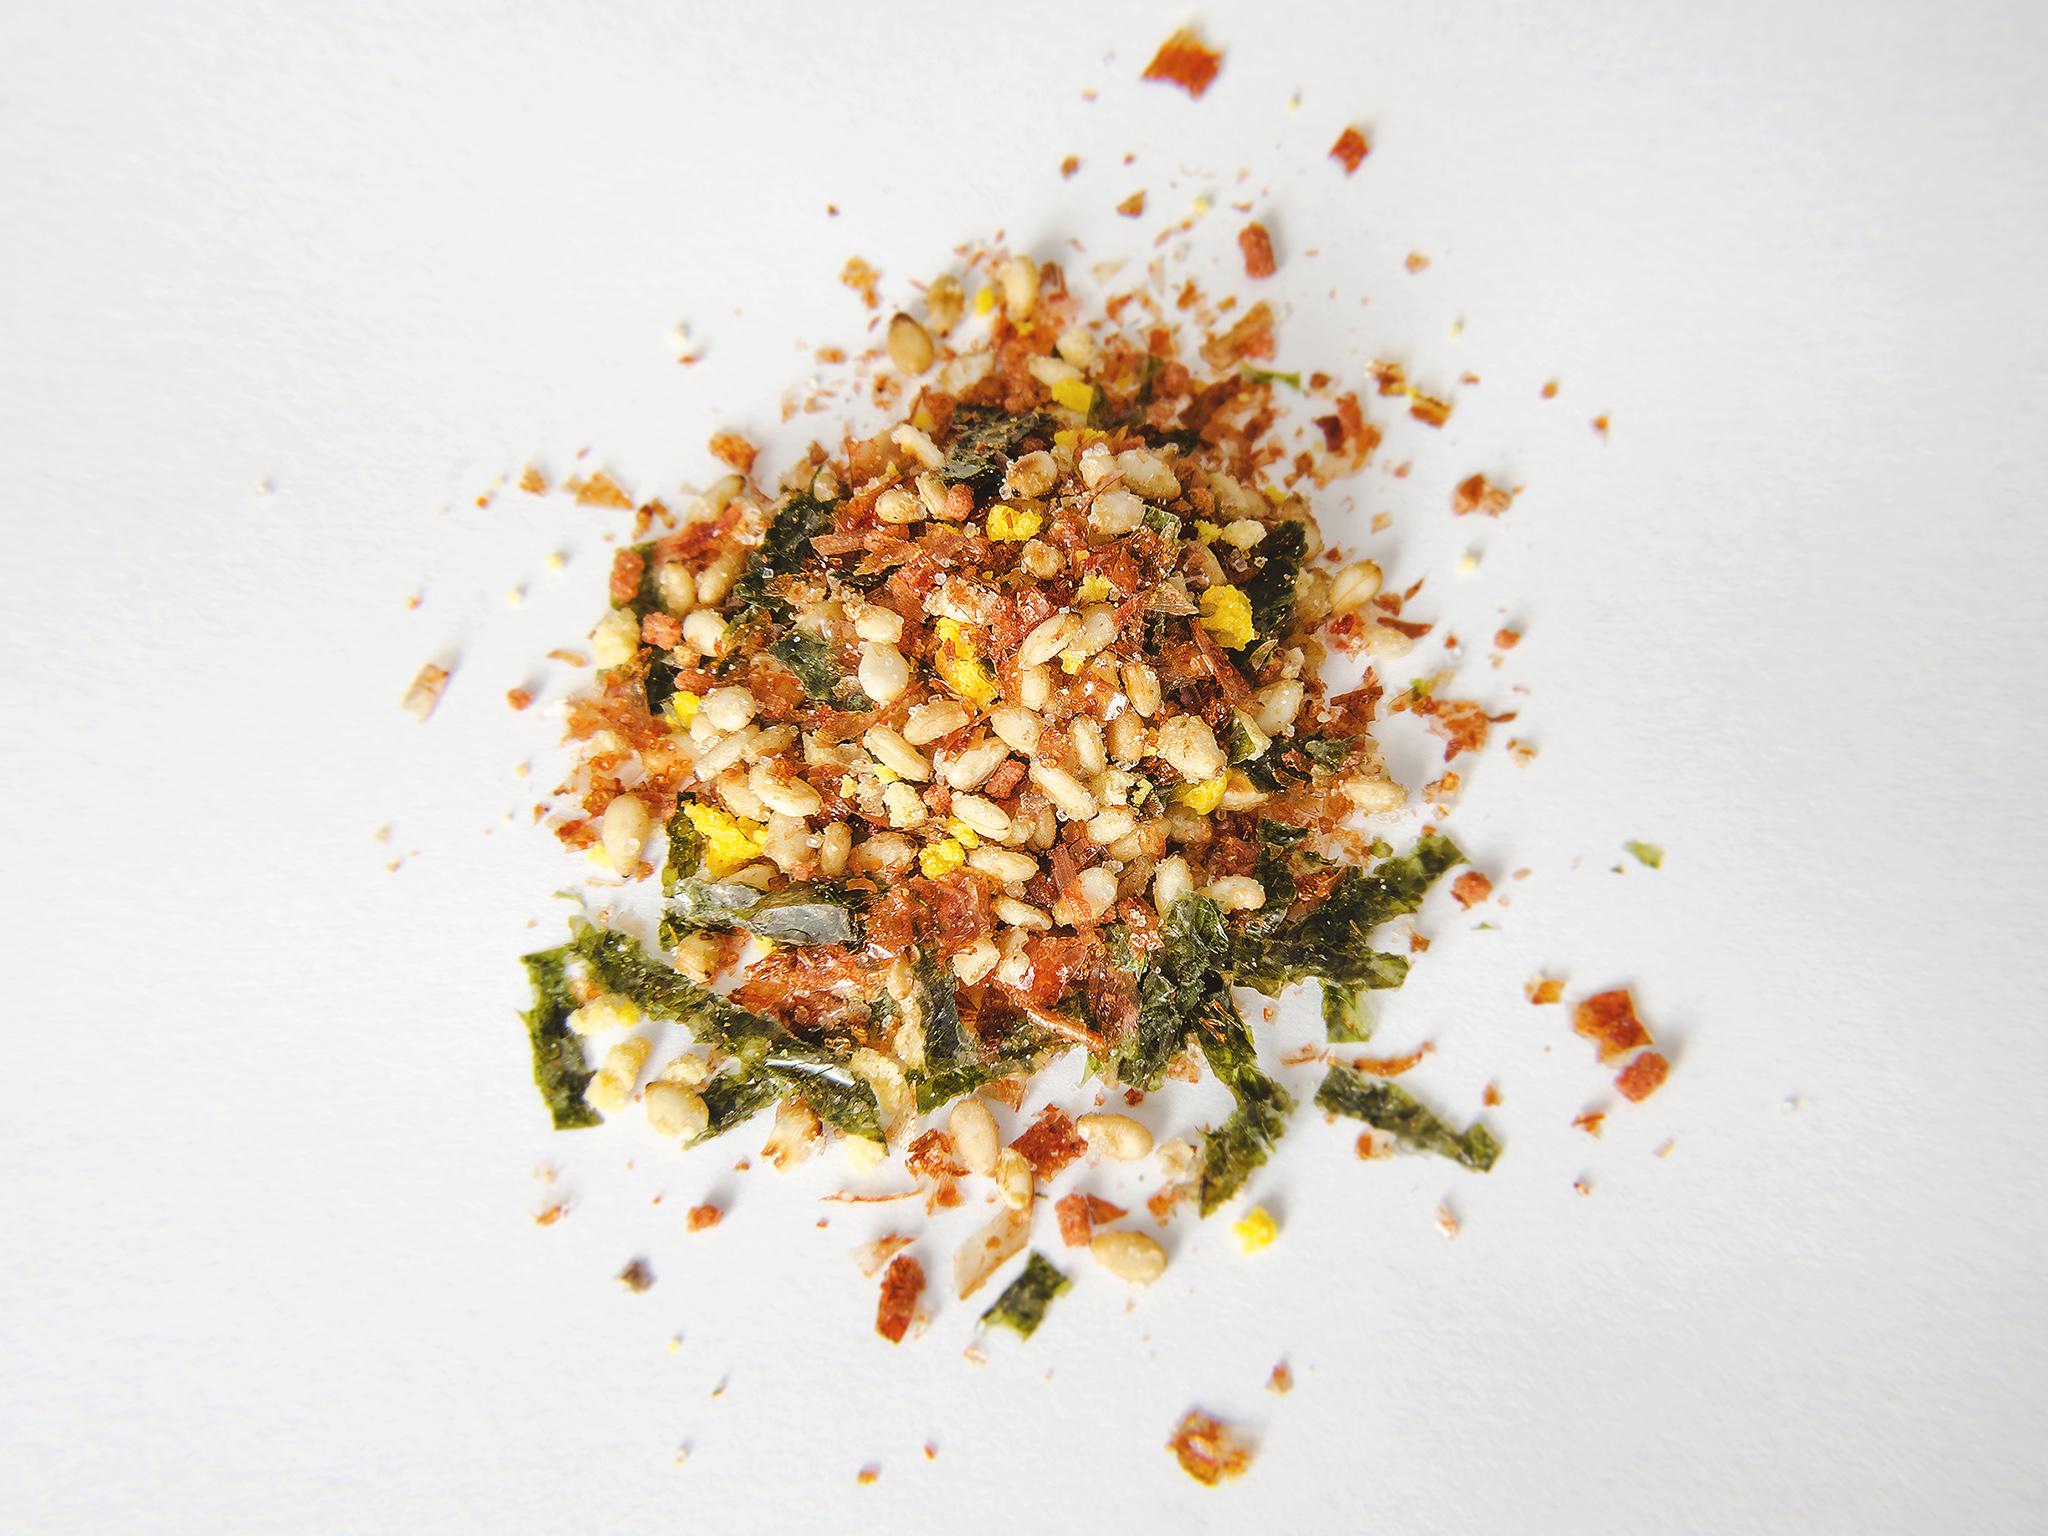 Furikake was developed in Japan after the First World War as a way to boost nutritional intake